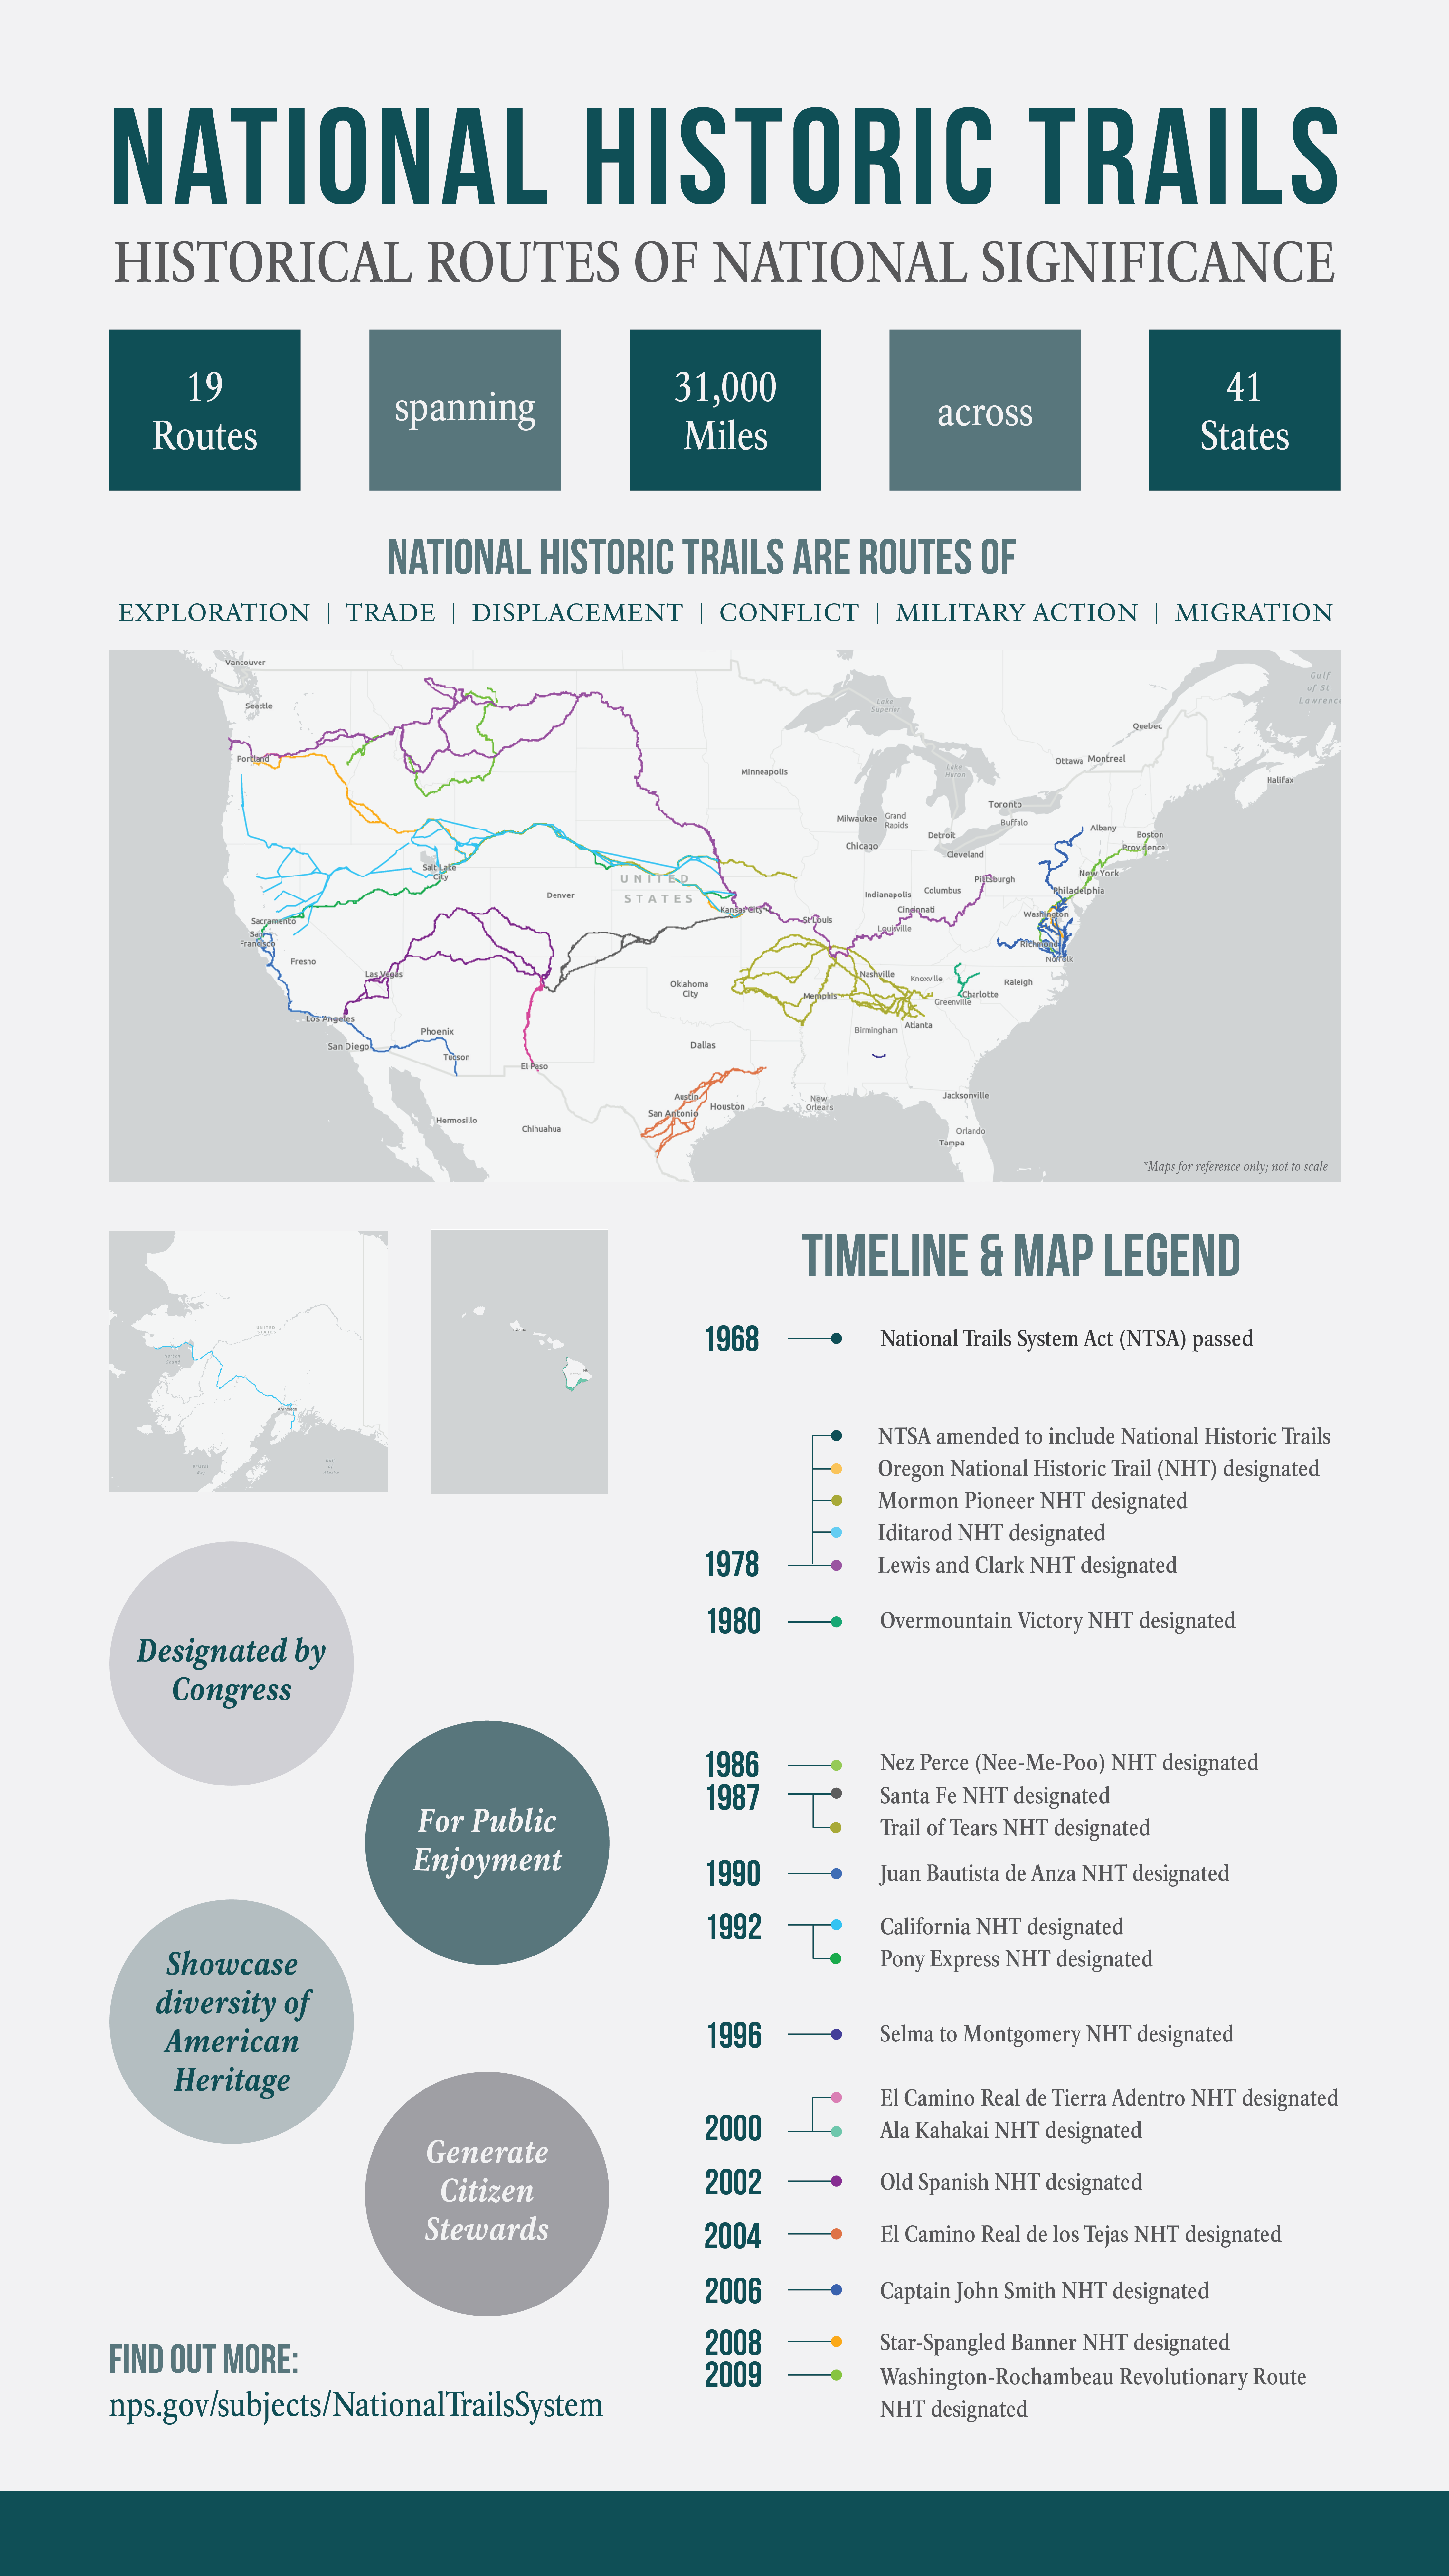 Infographic about National Historic Trails. Full image description included below.